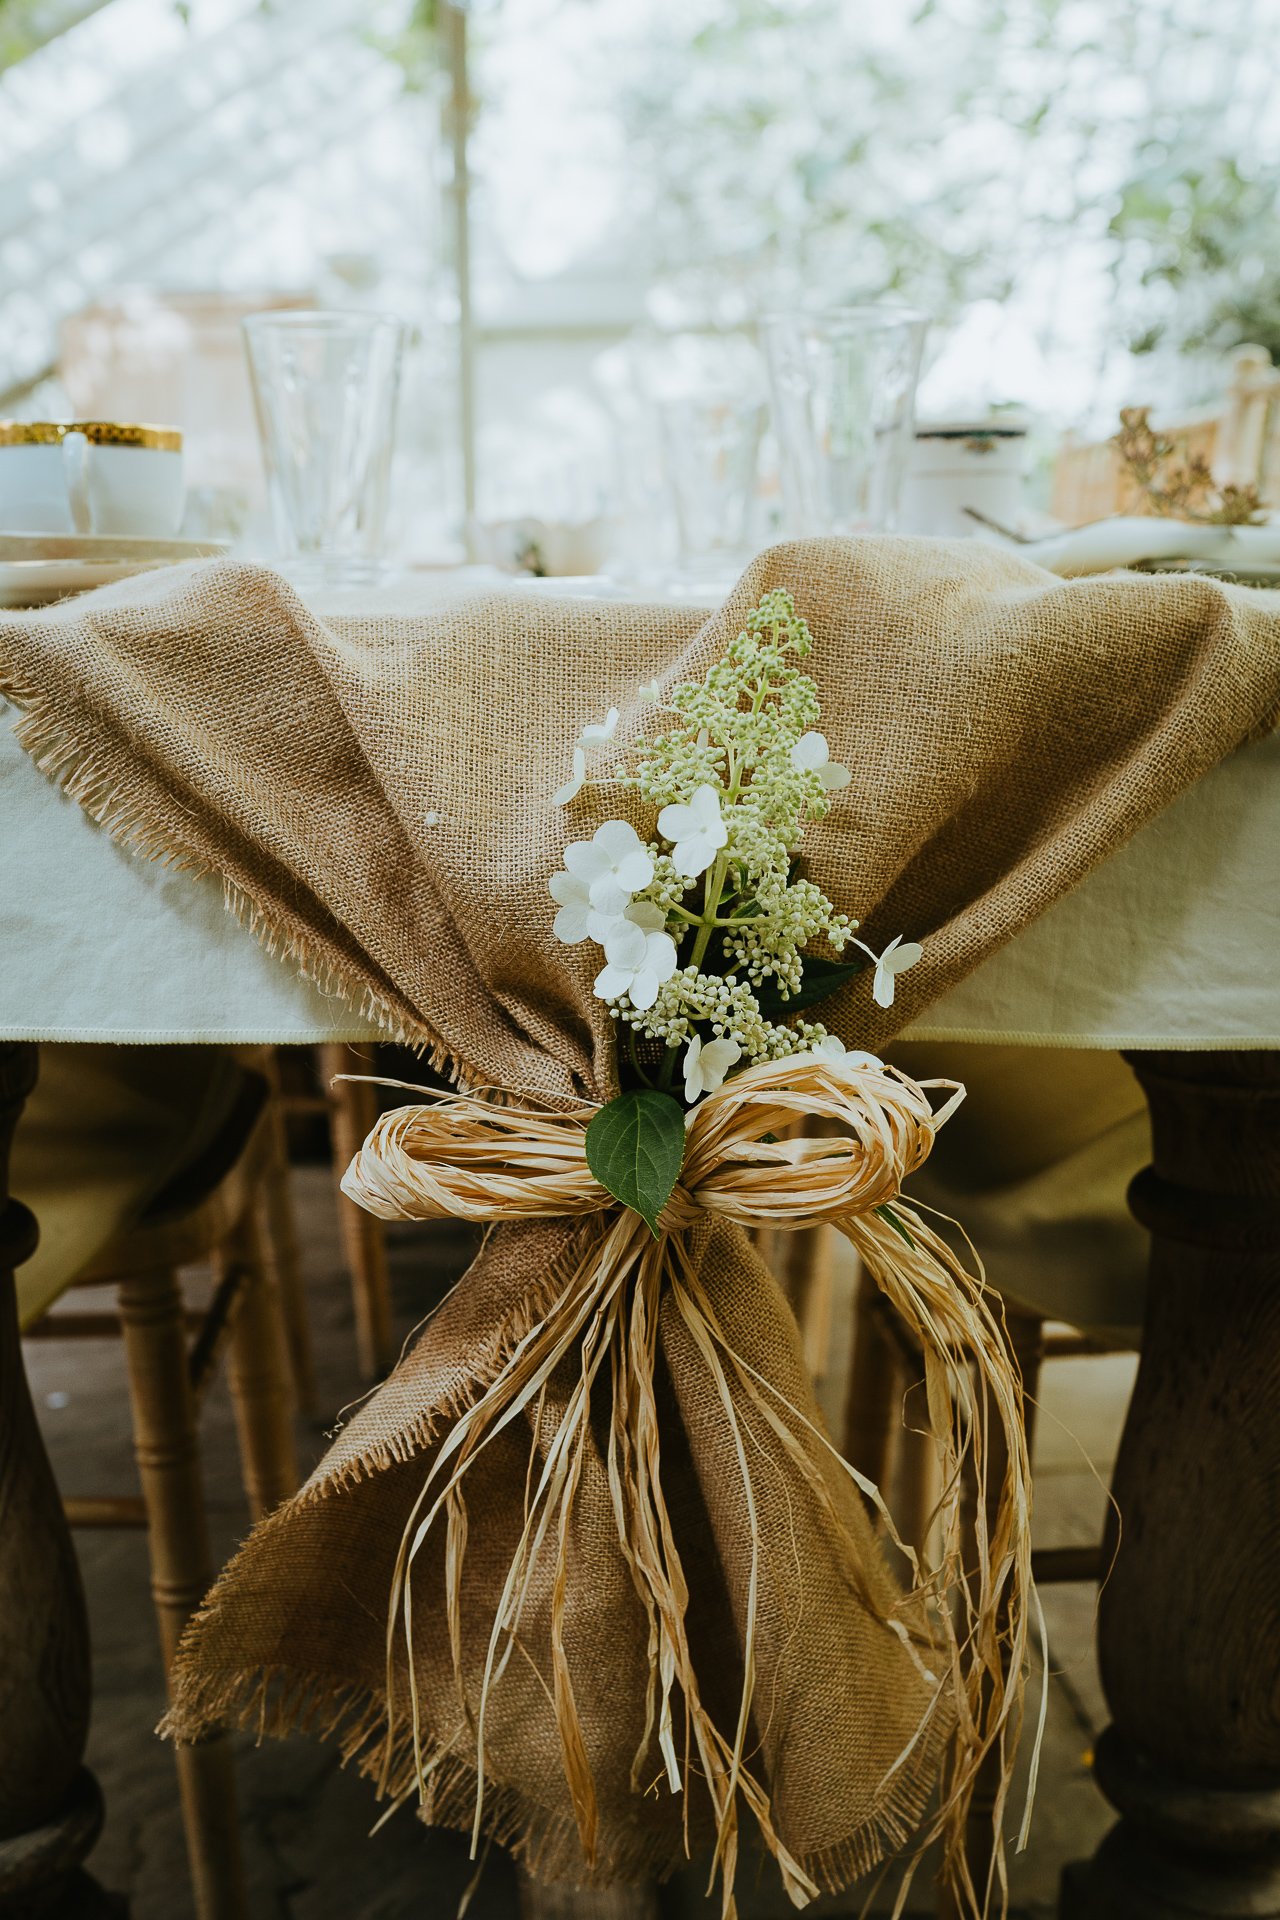 hessian table runner tied with beautiful flowers